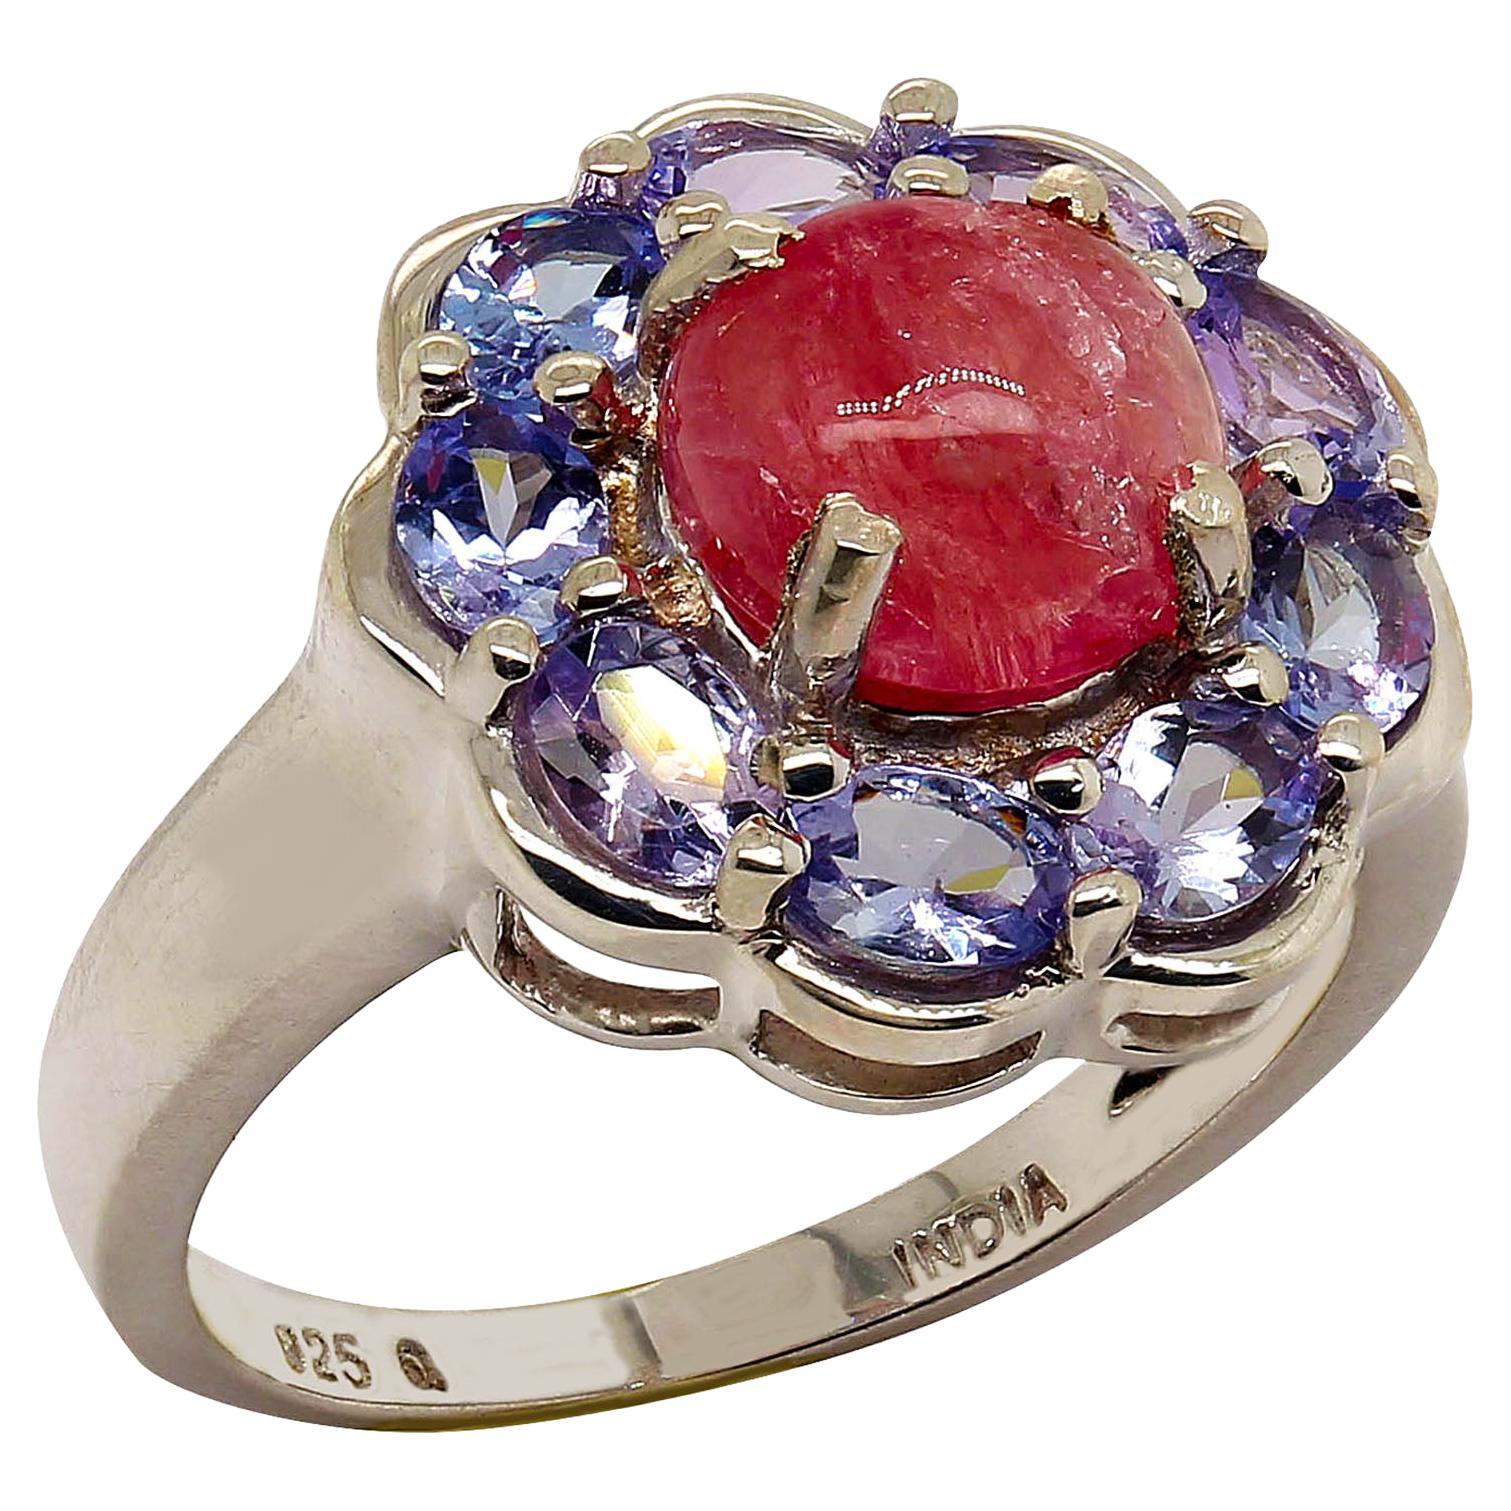 AJD Pink Tourmaline Cabochon in Tanzanite Halo Sterling Silver Ring